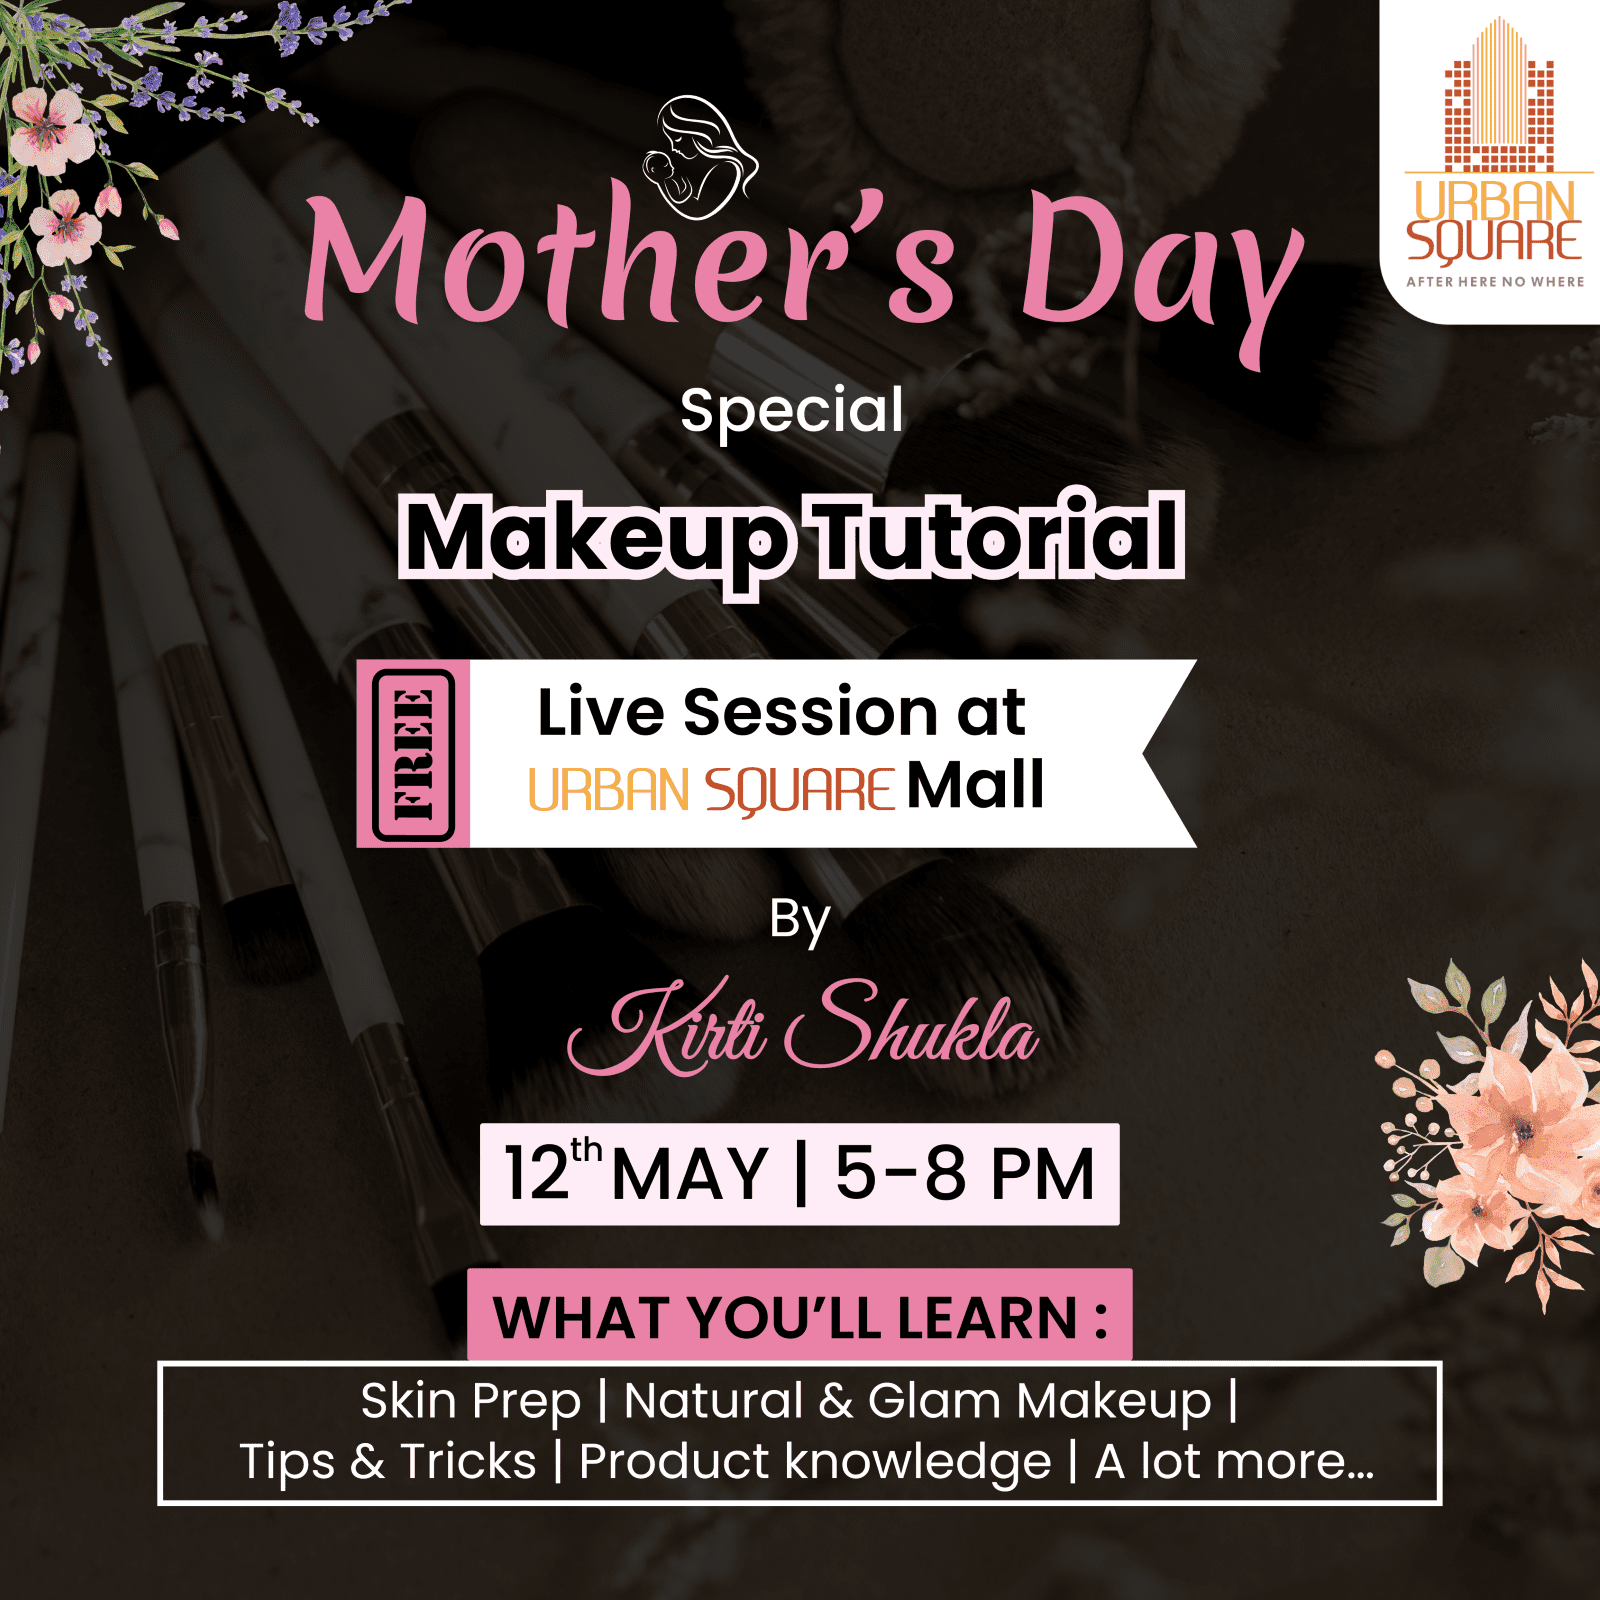 Mother’s Day Treat: Free Makeup Tutorial by Kriti Shukla at Urban Square Mall!